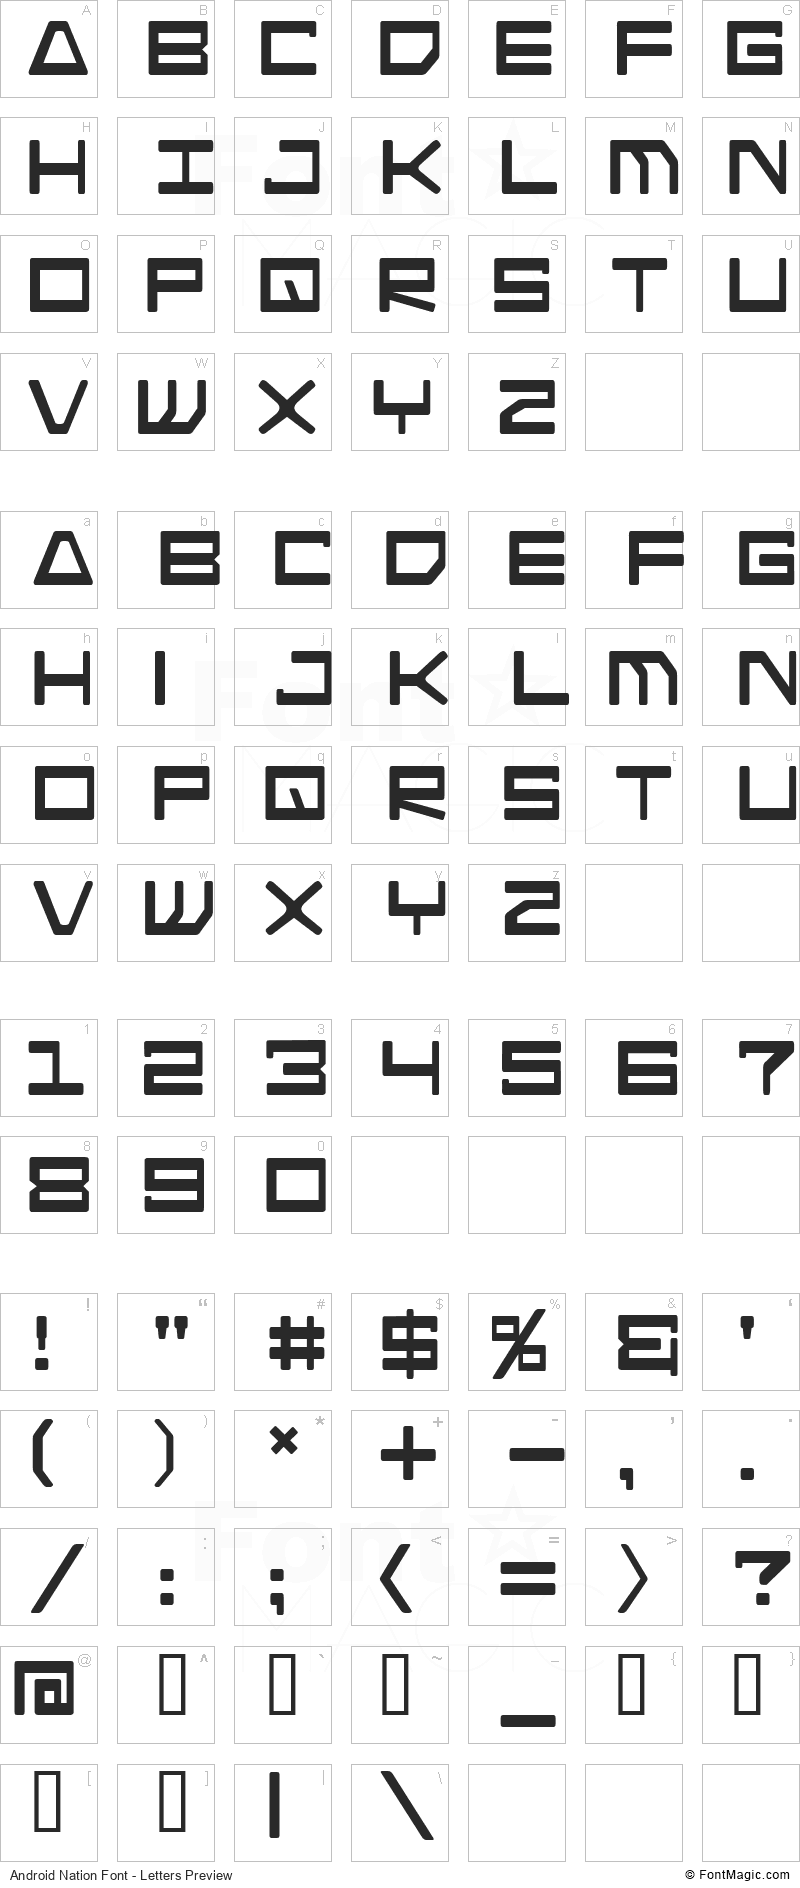 Android Nation Font - All Latters Preview Chart